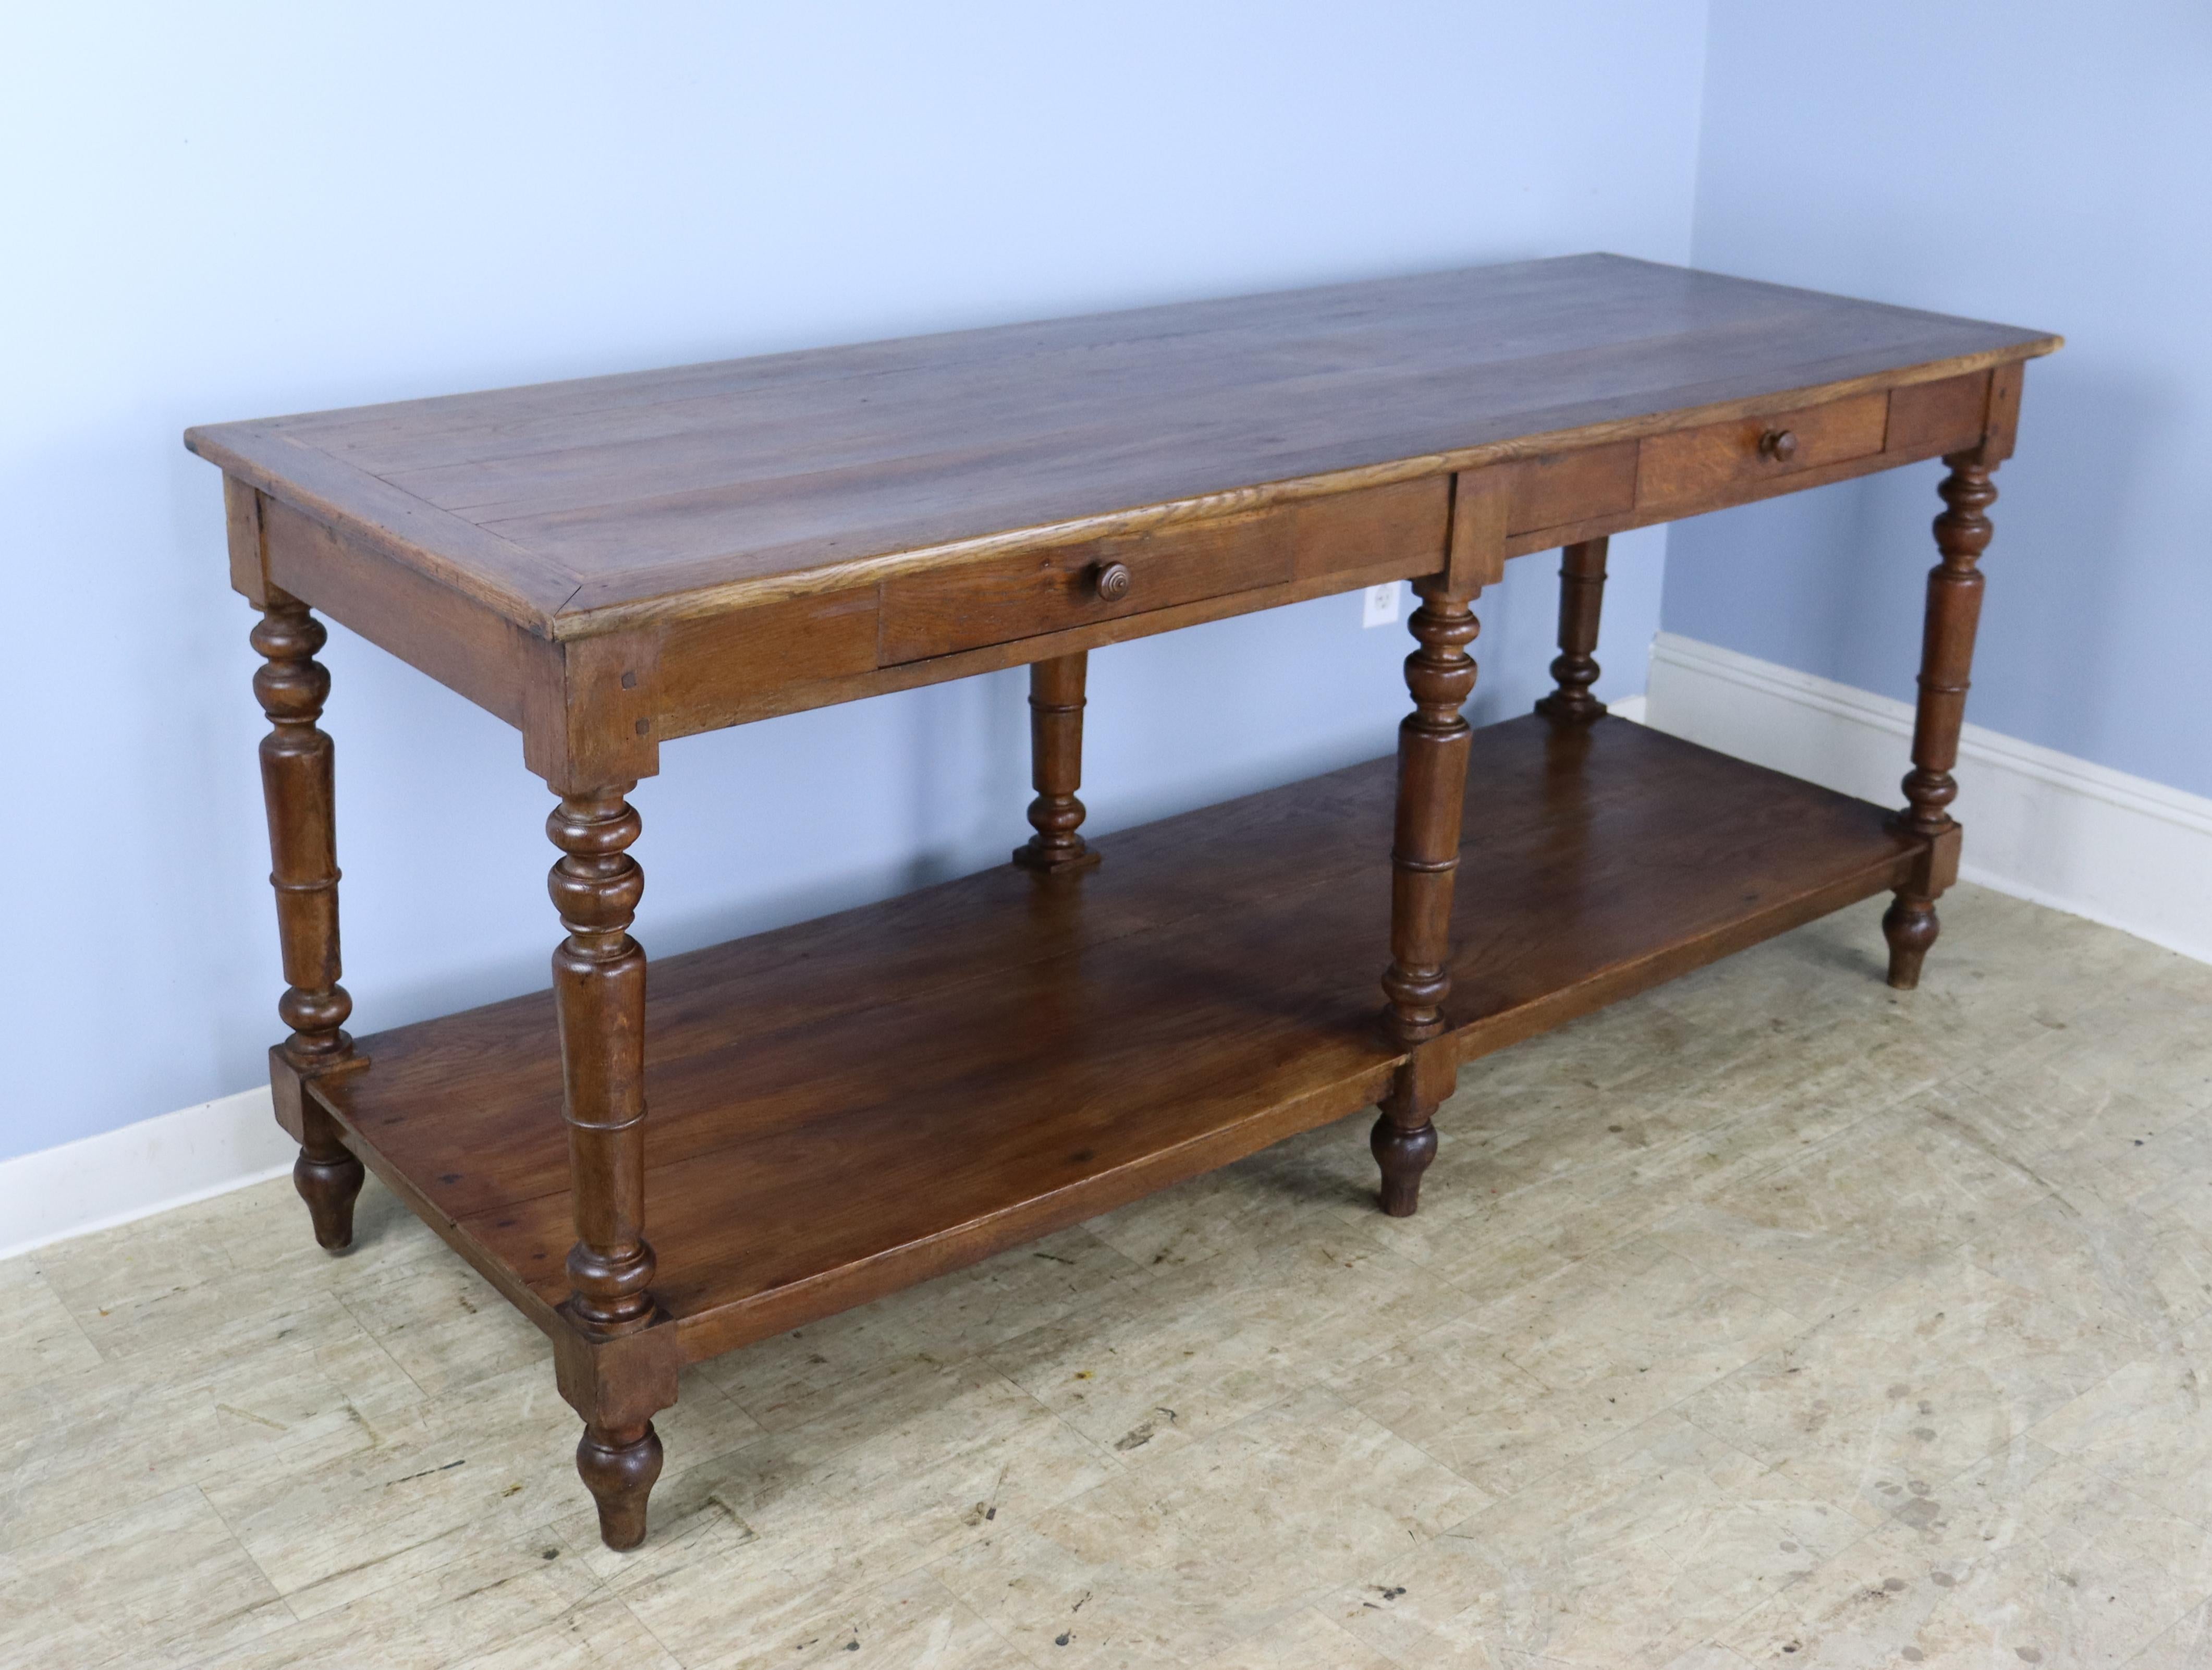 A fabulous French chestnut draper's table, originally for use by a tailor or seamstress. Legs have good turned detail and nice patina. Top has a smooth clean look, with some small areas of wear and two 19th century patches, shown. Would work well as